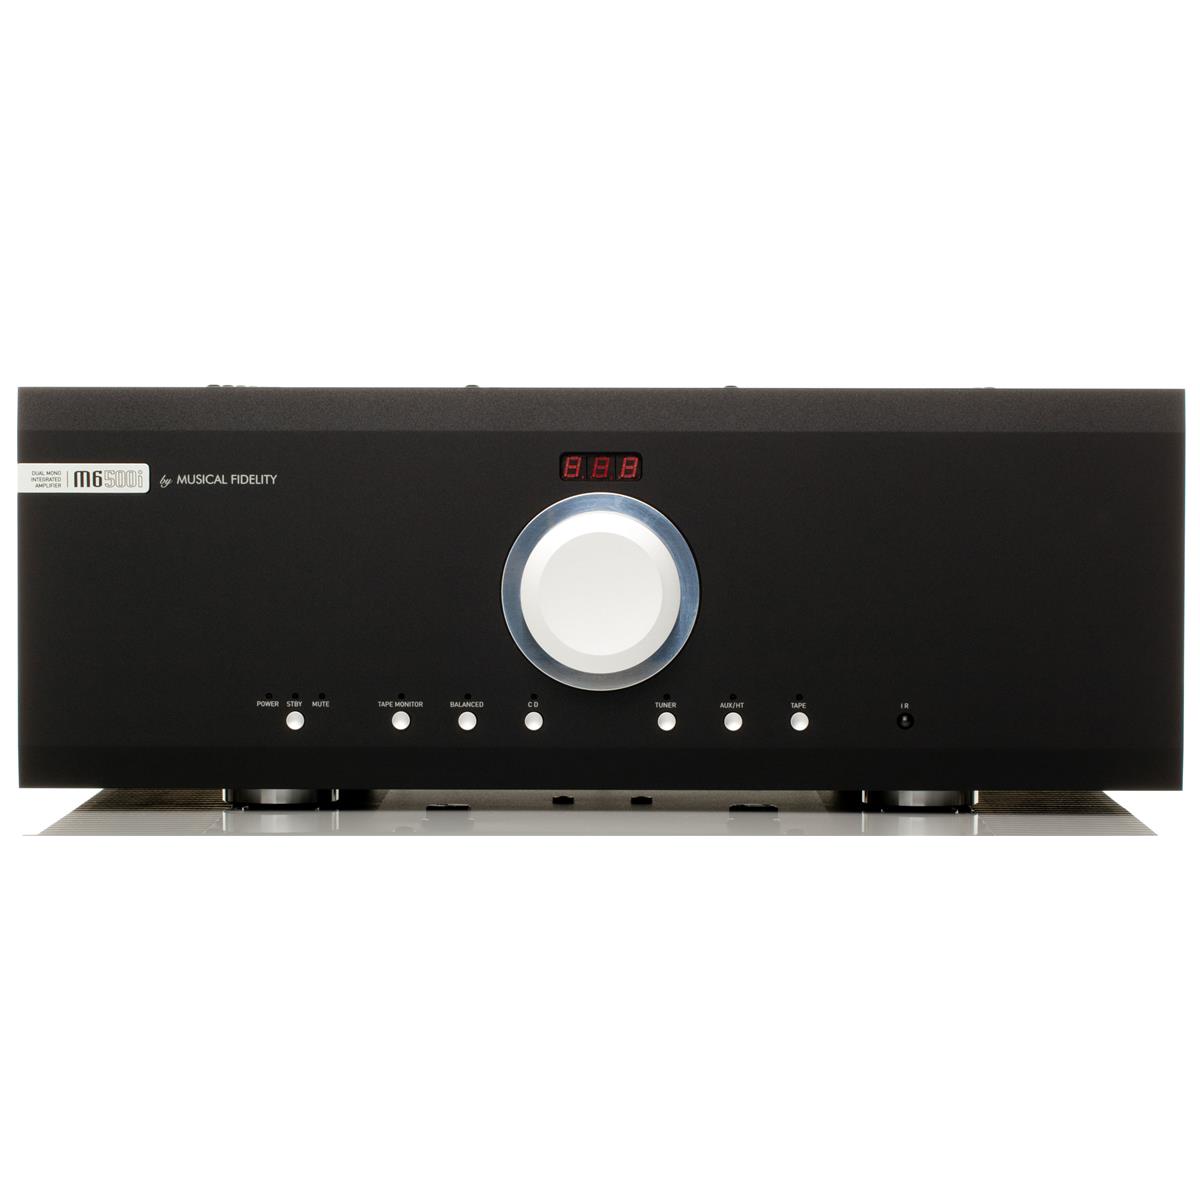 Image of Musical Fidelity M6si500 500W Integrated Amplifier